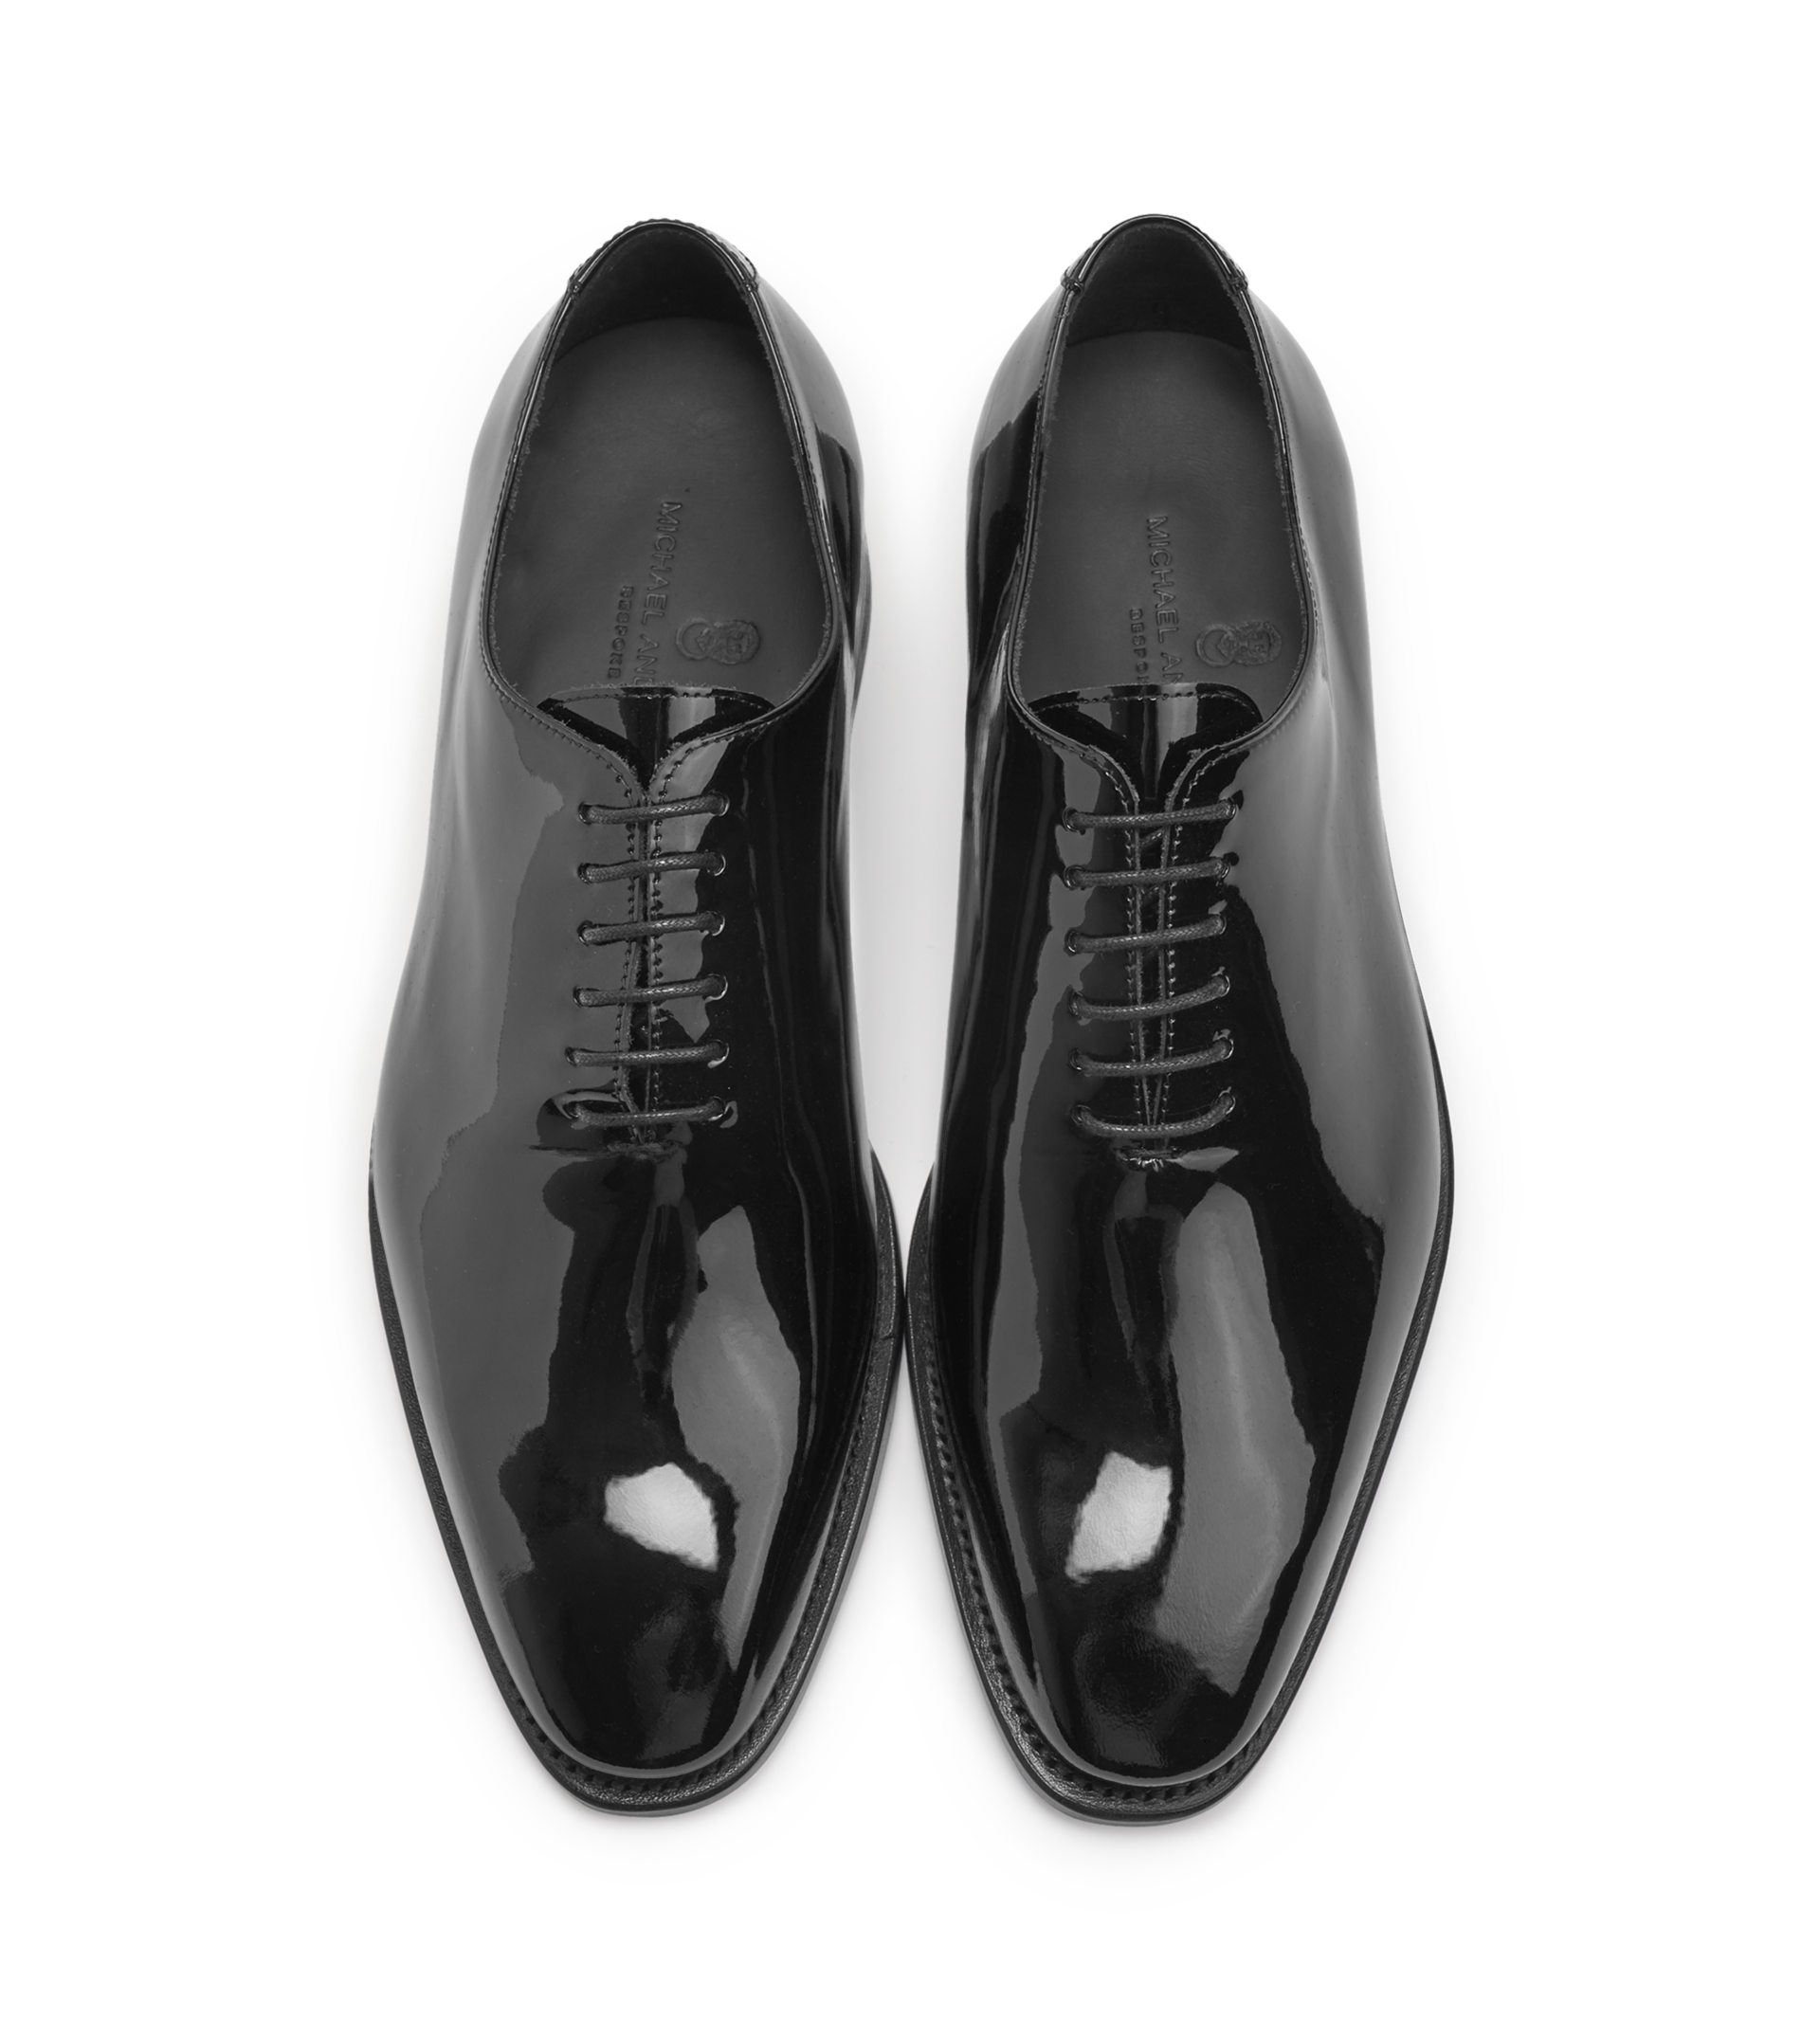 Whole-Cut Patent-Leather Oxford Shoes